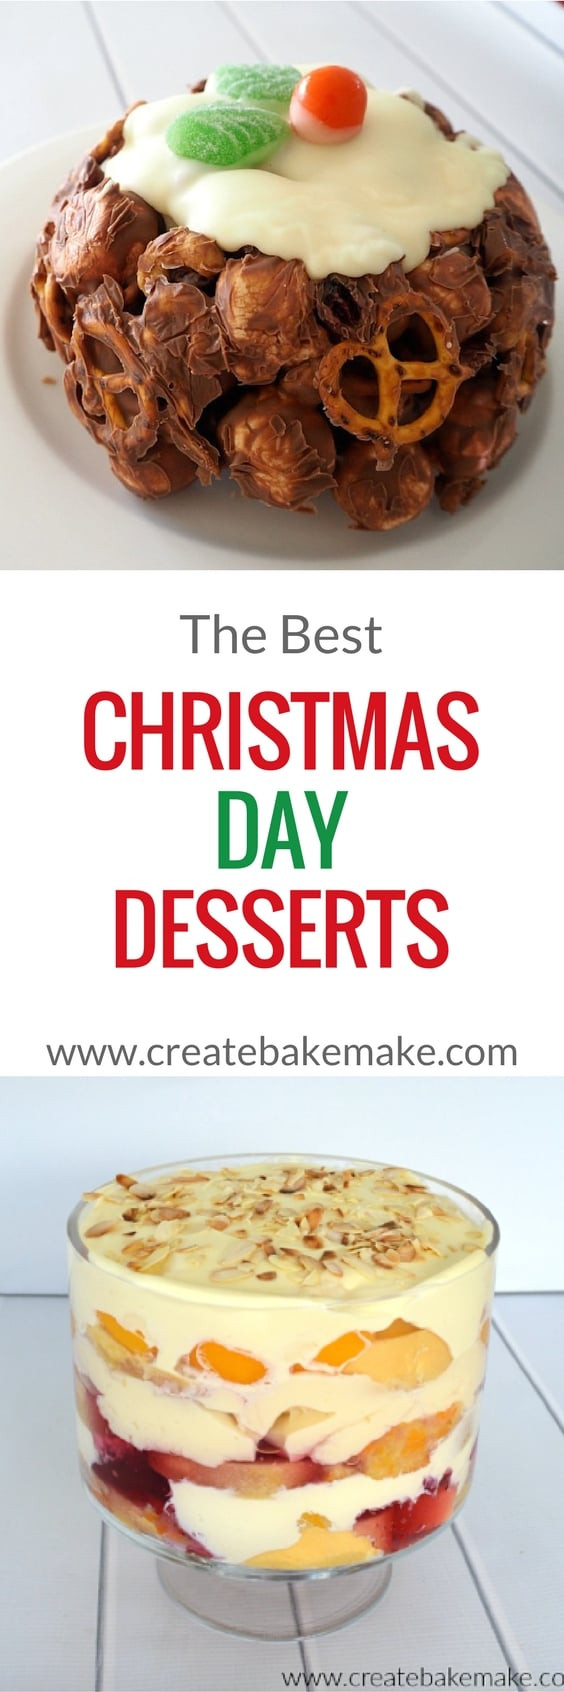 The Best Christmas Desserts
 The Best Christmas Day Desserts Create Bake Make